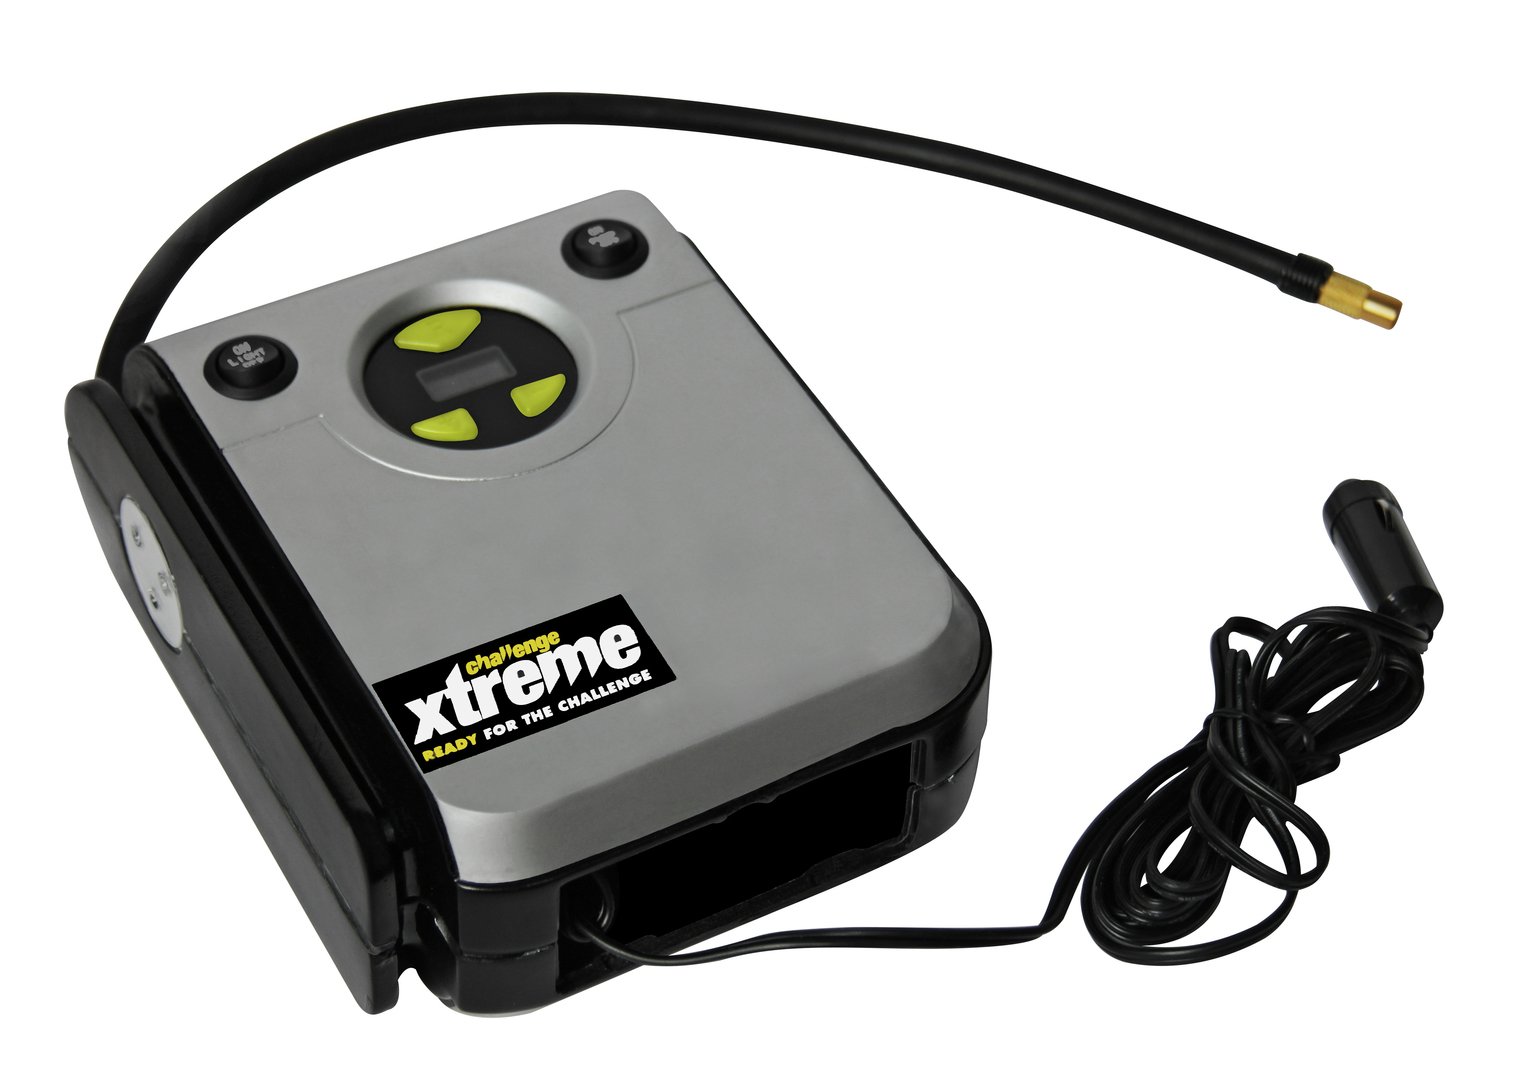 Challenge Xtreme Digital Tyre Inflator with Auto Cut Off